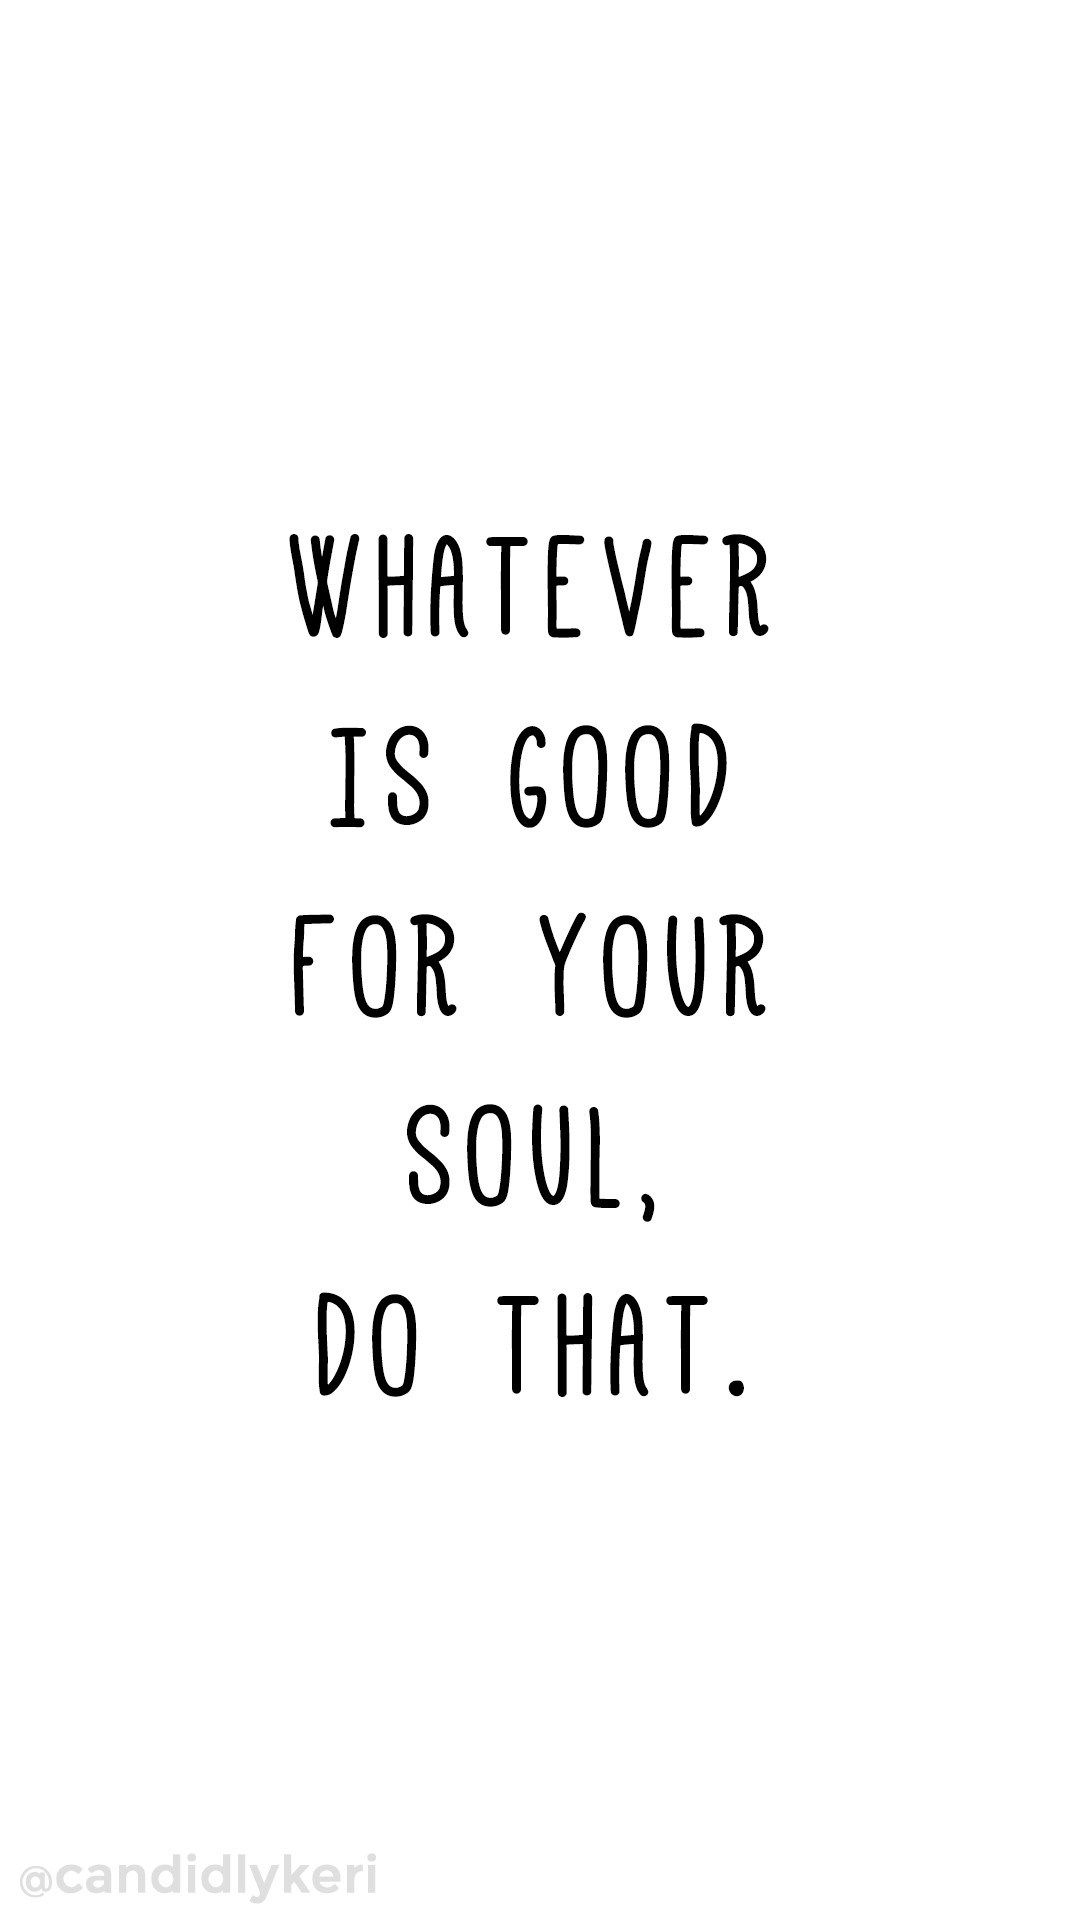 Whatever is good for your soul do that. Quote inspirational motivational wallpaper you can download